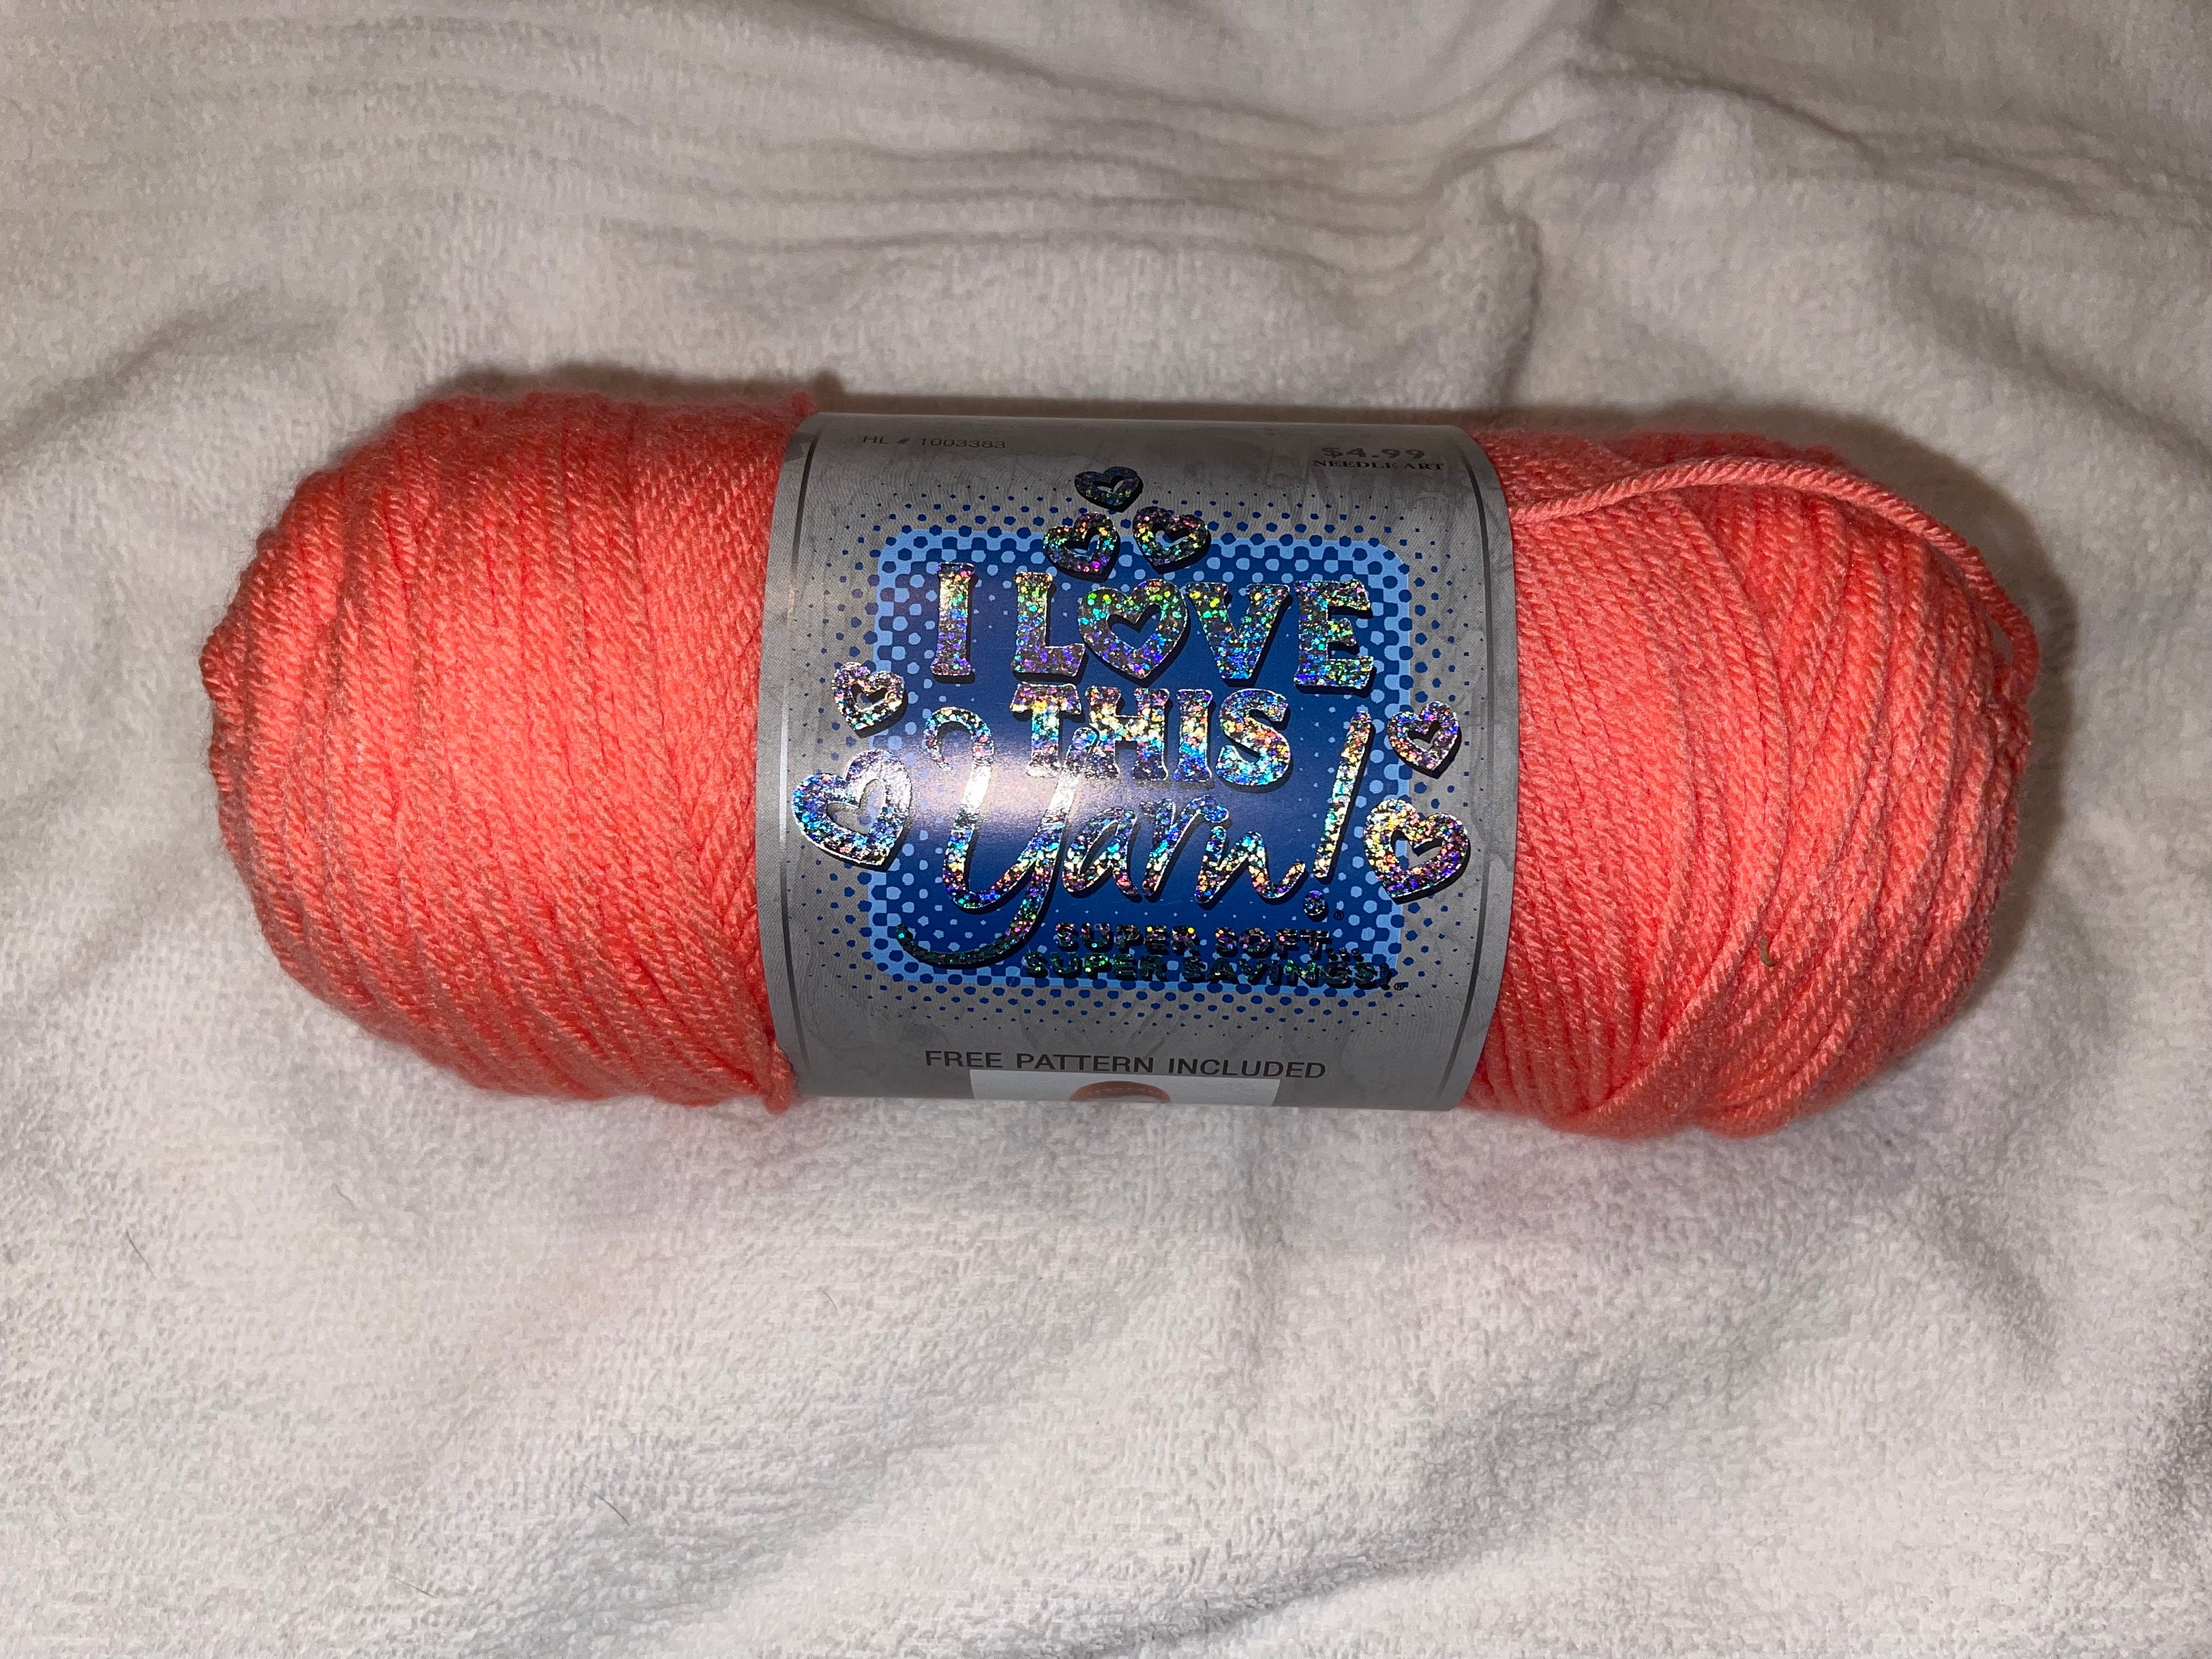 I love this yarn in soft pink